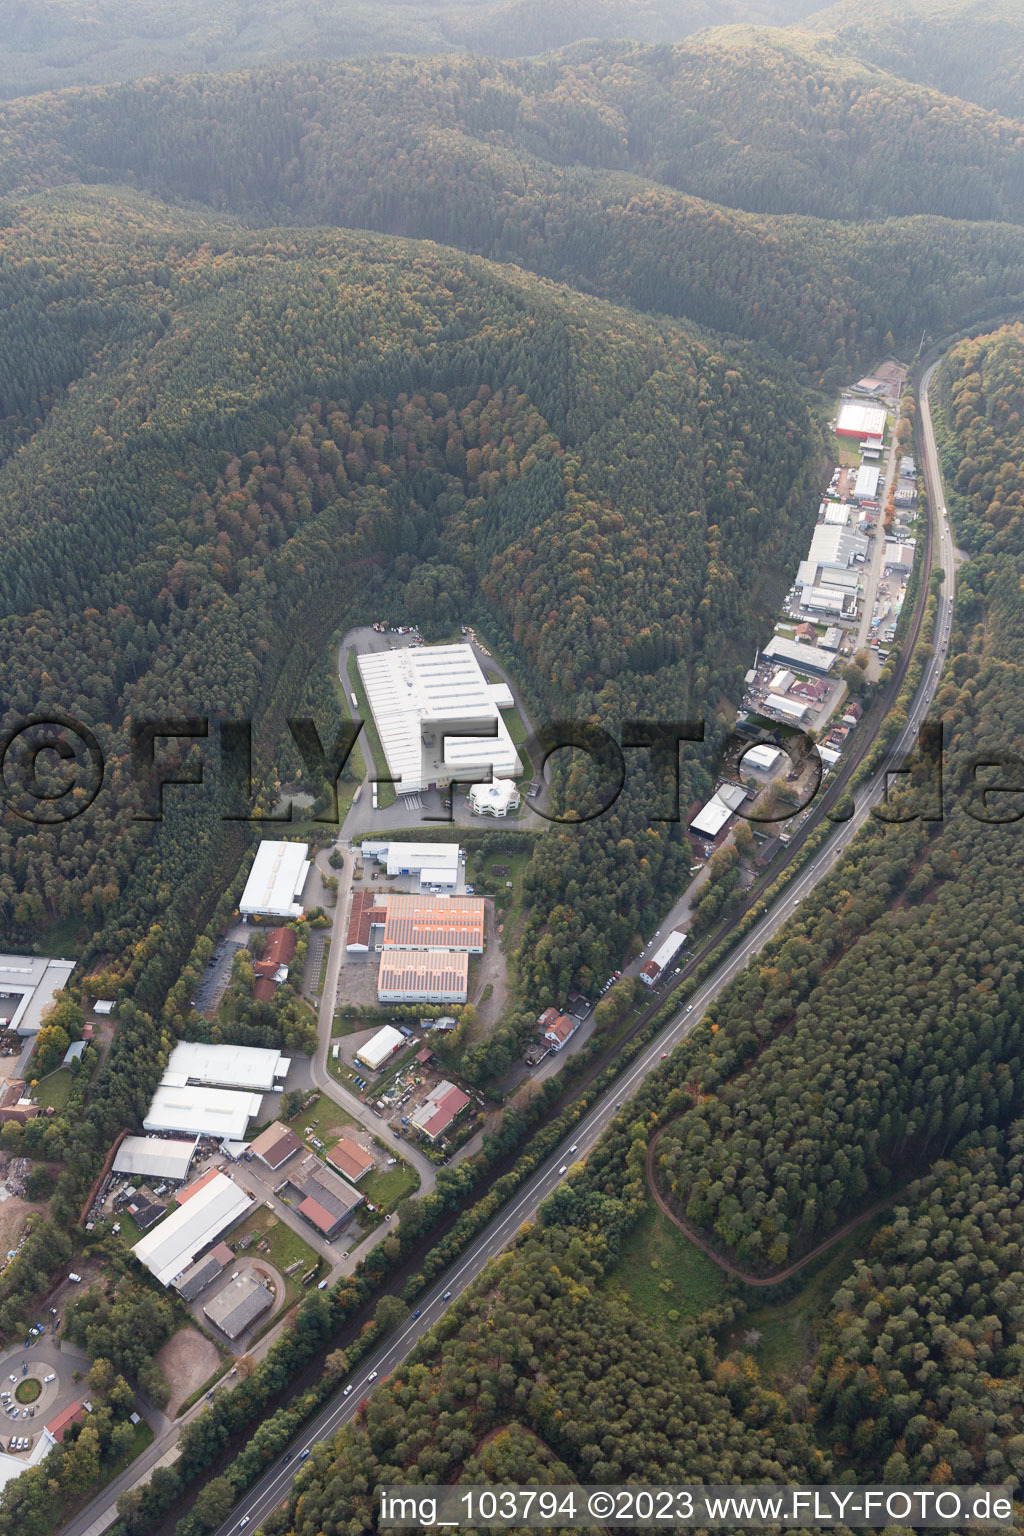 Aerial photograpy of Hauenstein in the state Rhineland-Palatinate, Germany